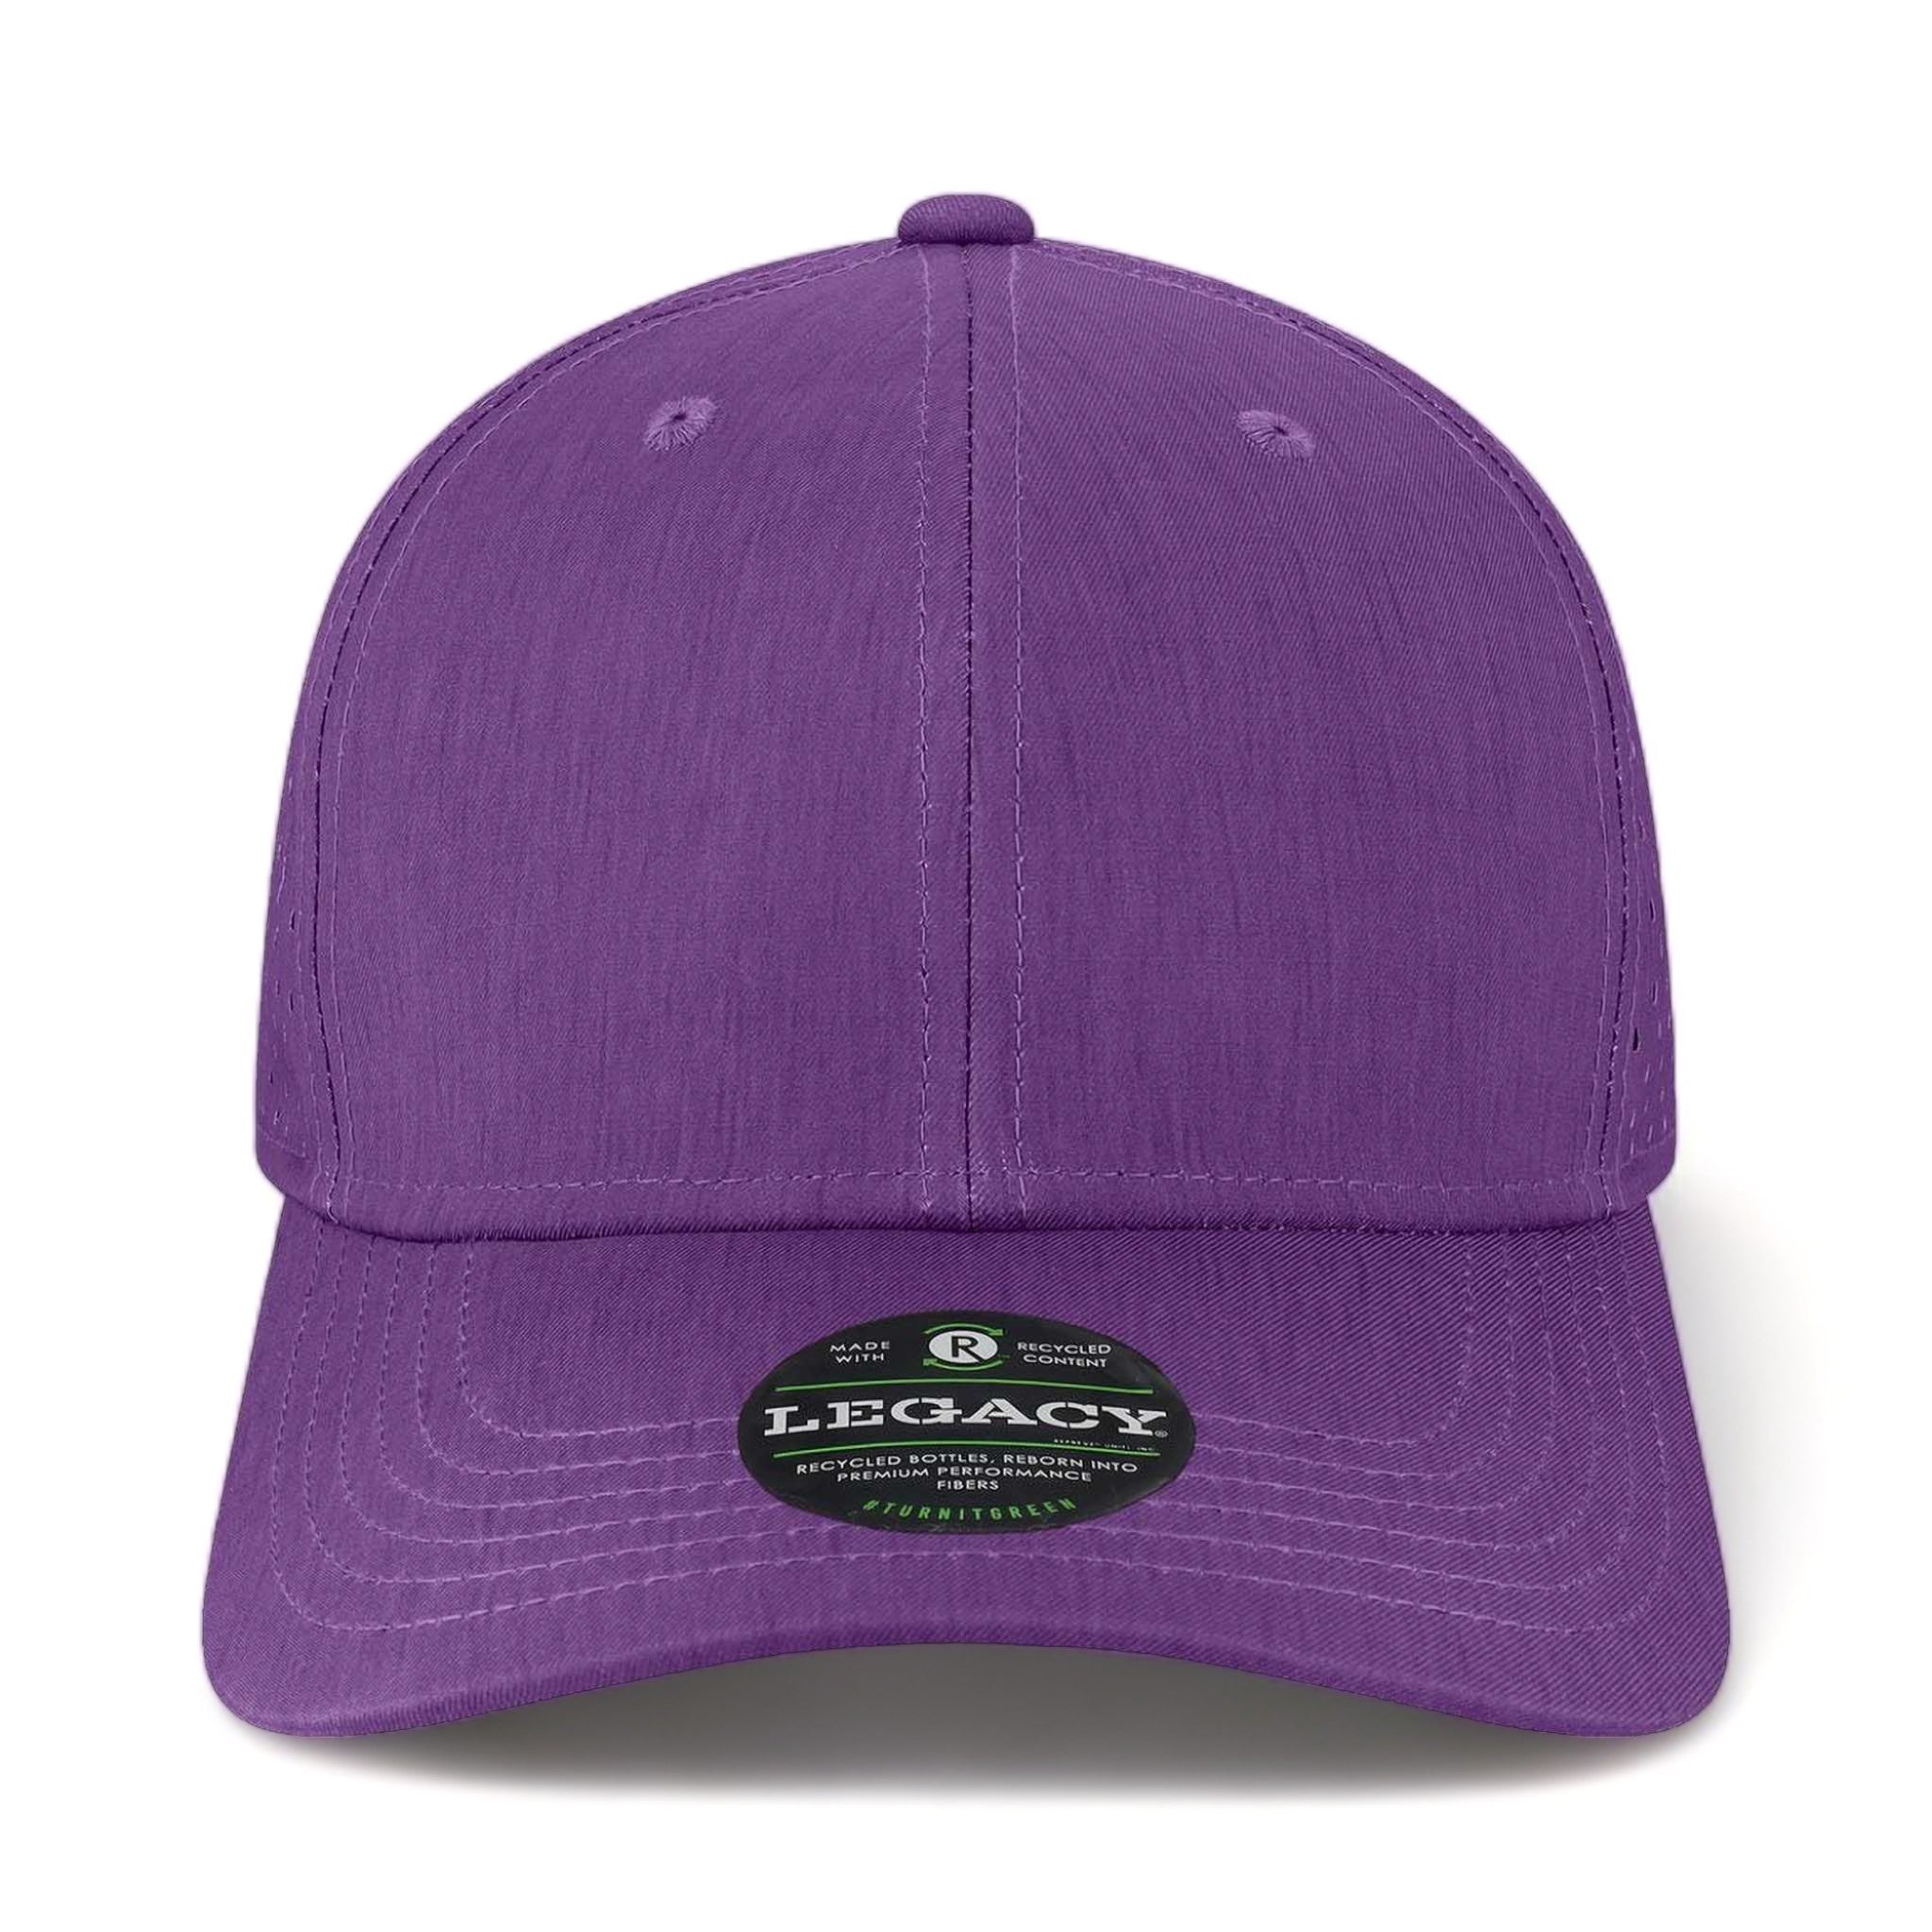 Front view of LEGACY REMPA custom hat in eco purple